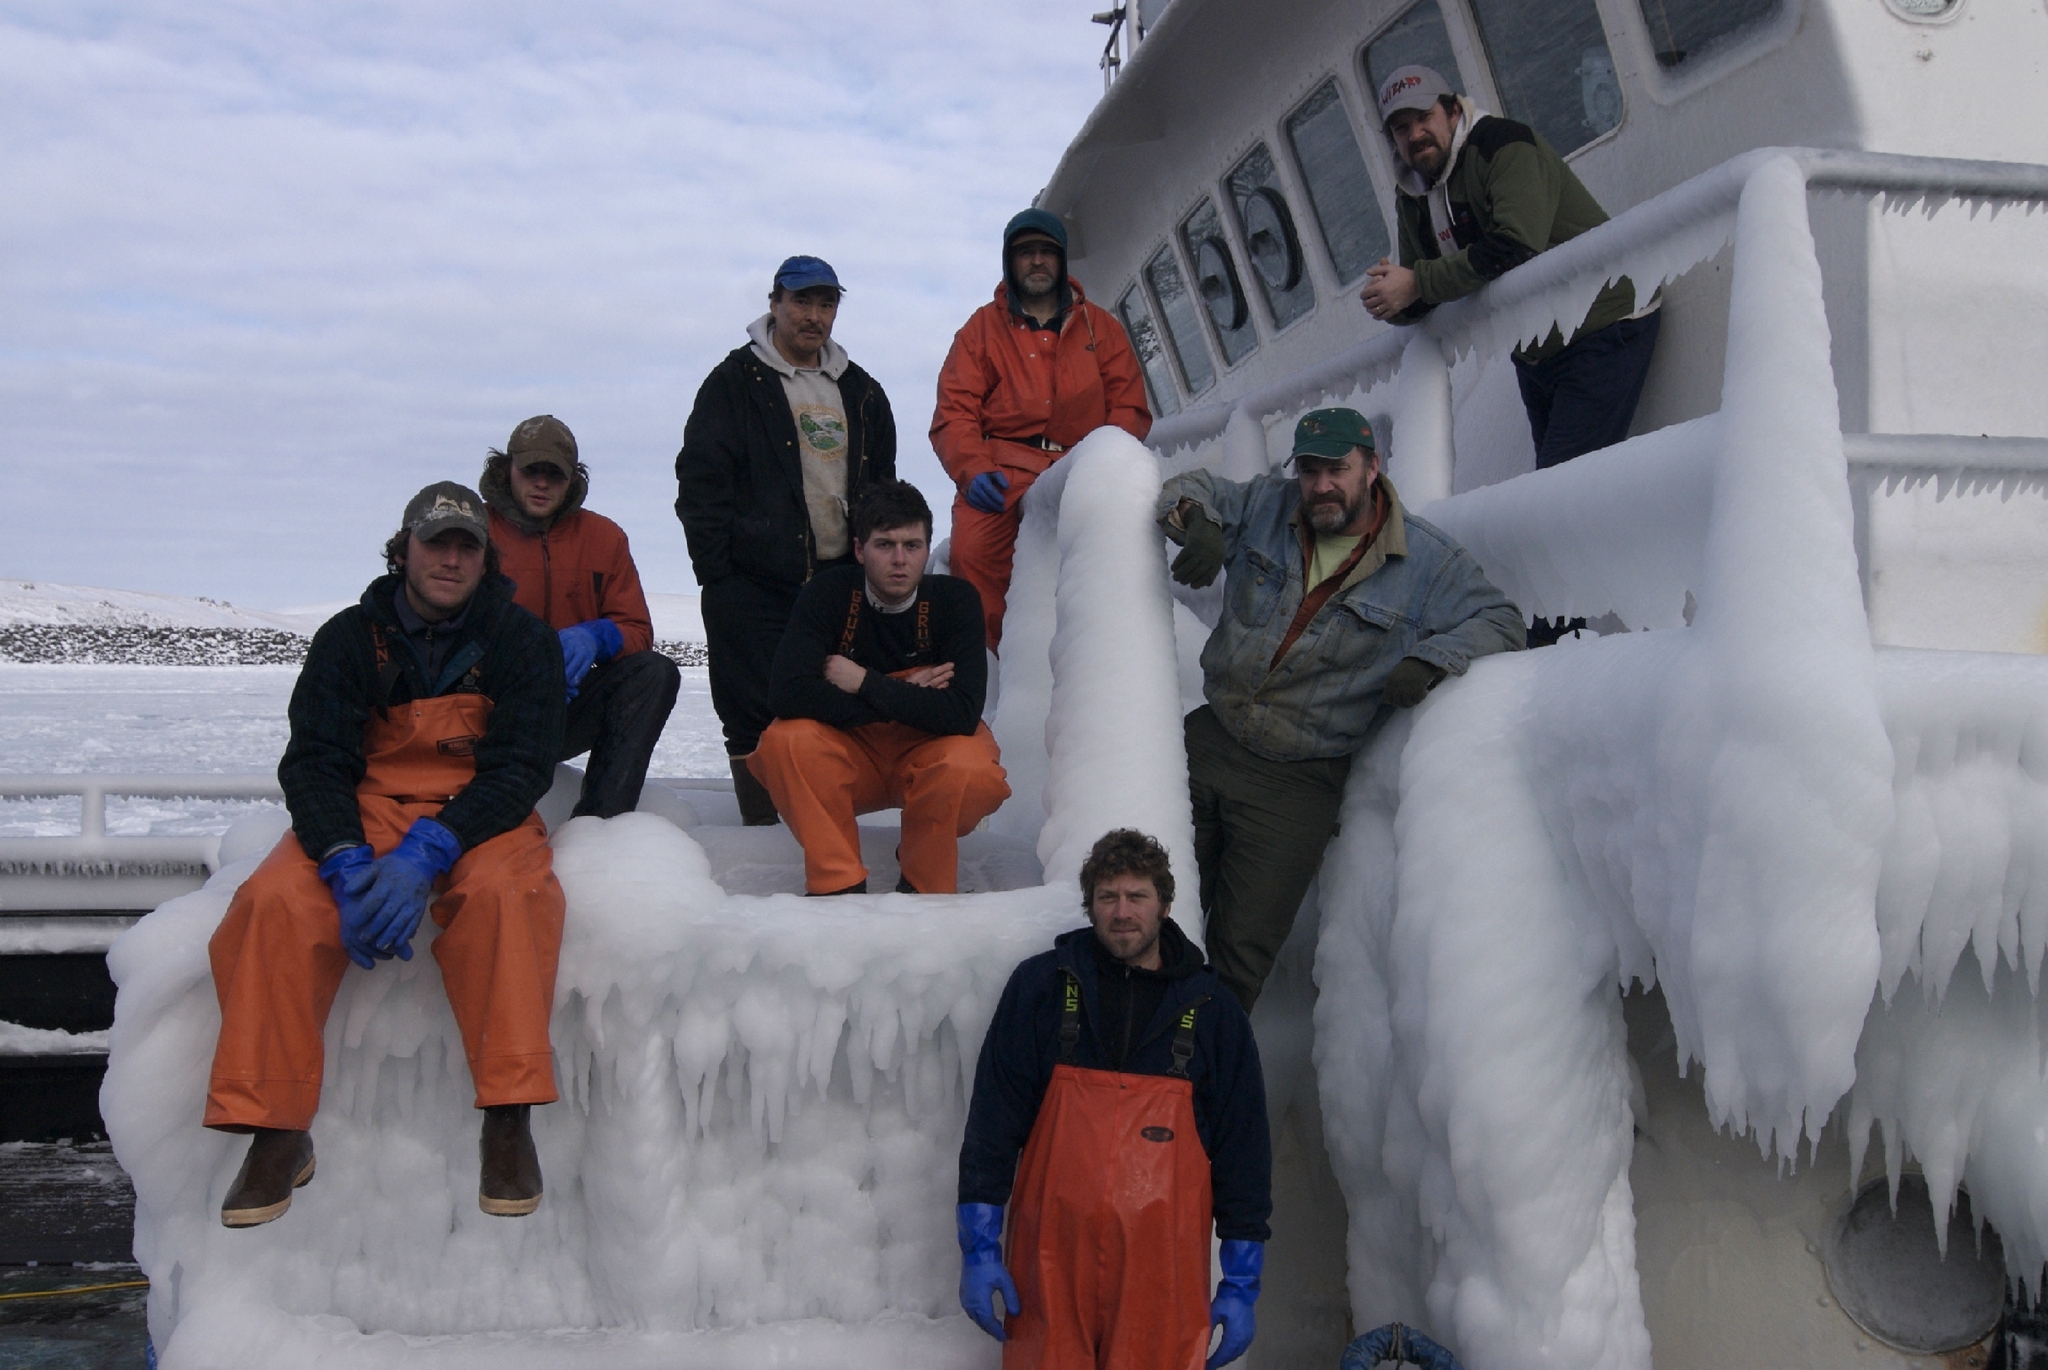 Keith Colburn, Crosby Leveen, Lenny Lekanoff, Monty Colburn, Gary Soper, Lynn Guitard and Cooper Weatherby in Deadliest Catch (2005)